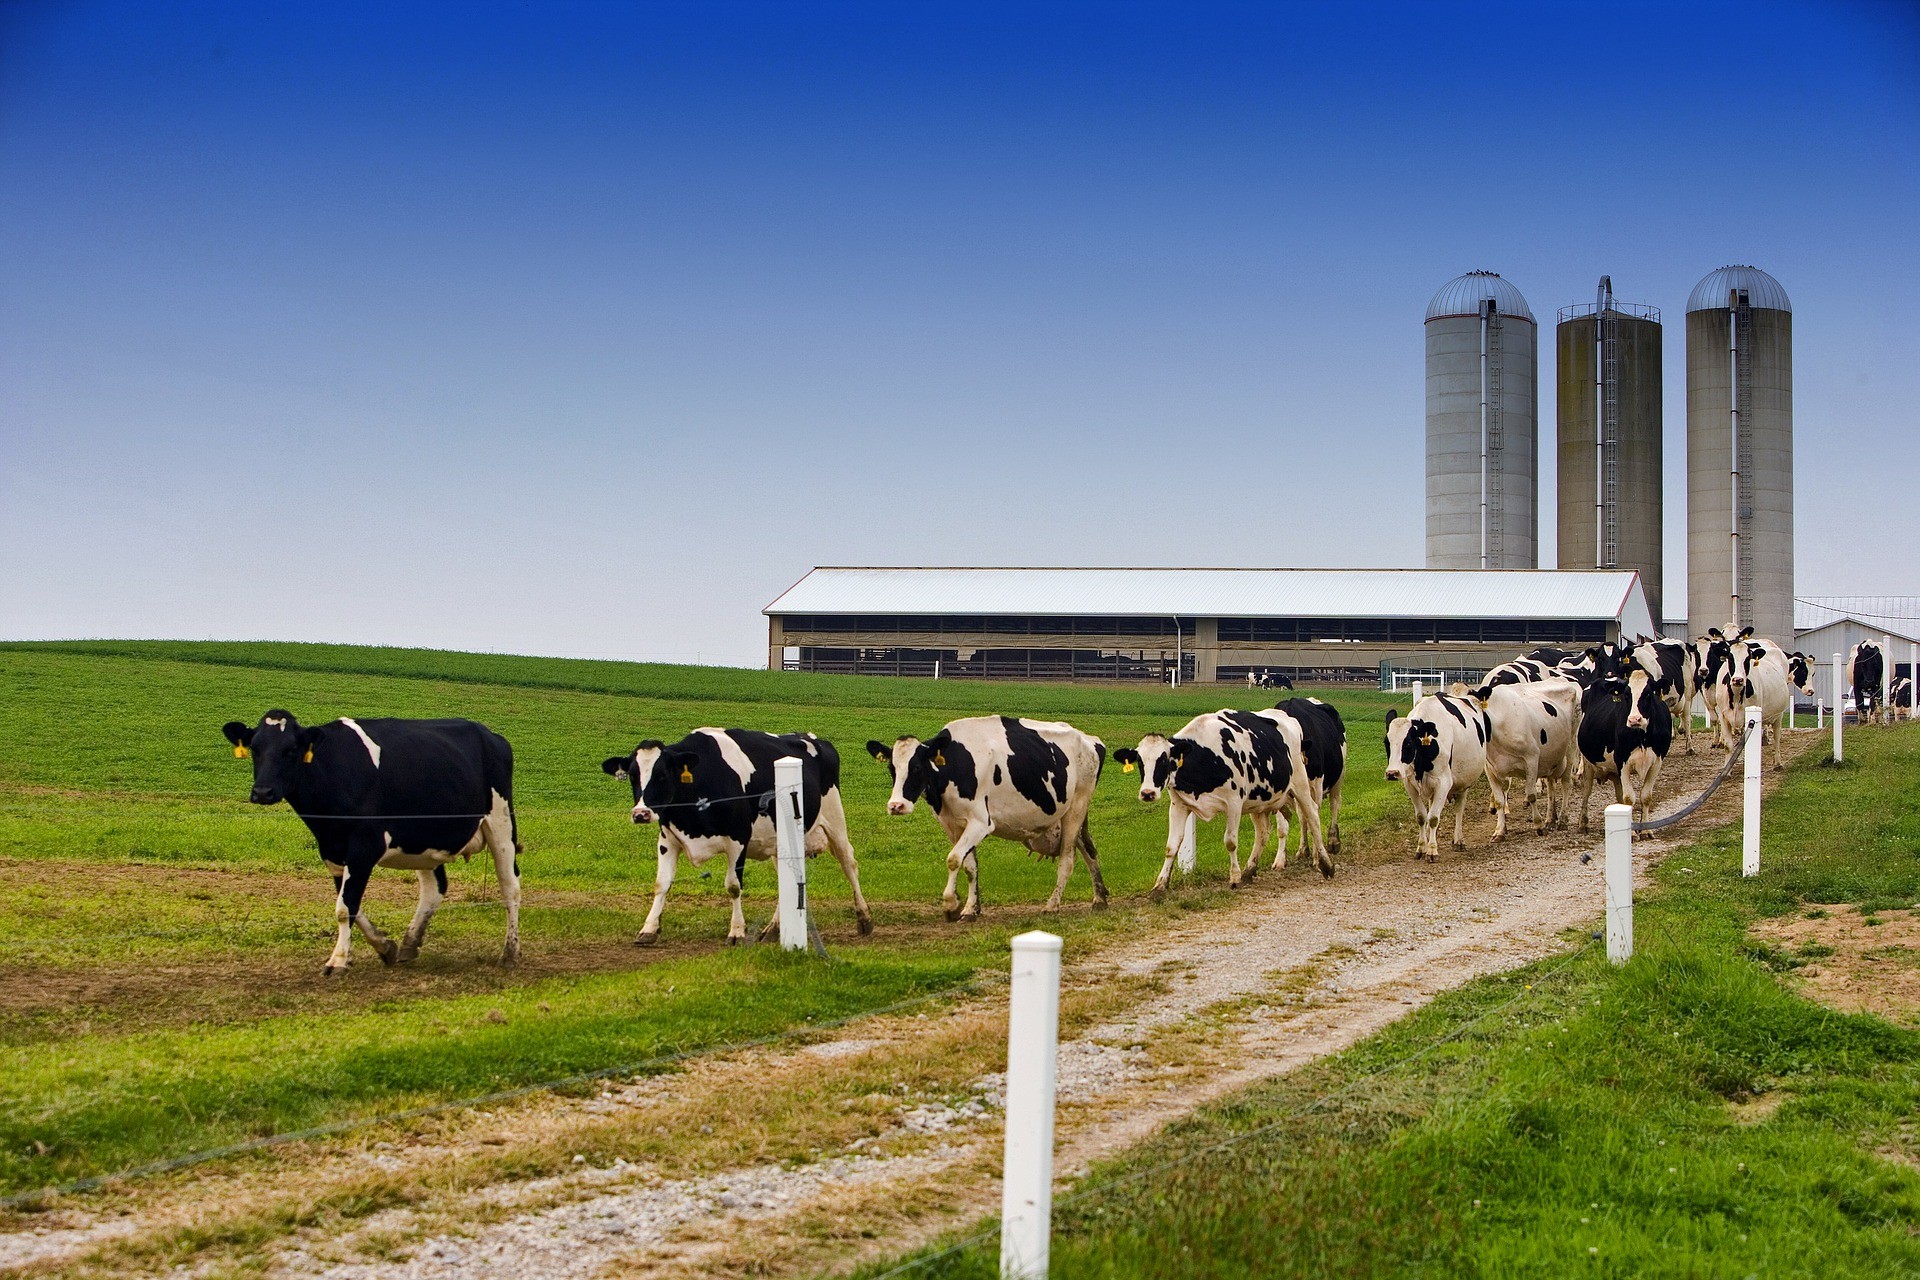 an image of several cows with a farm in the background